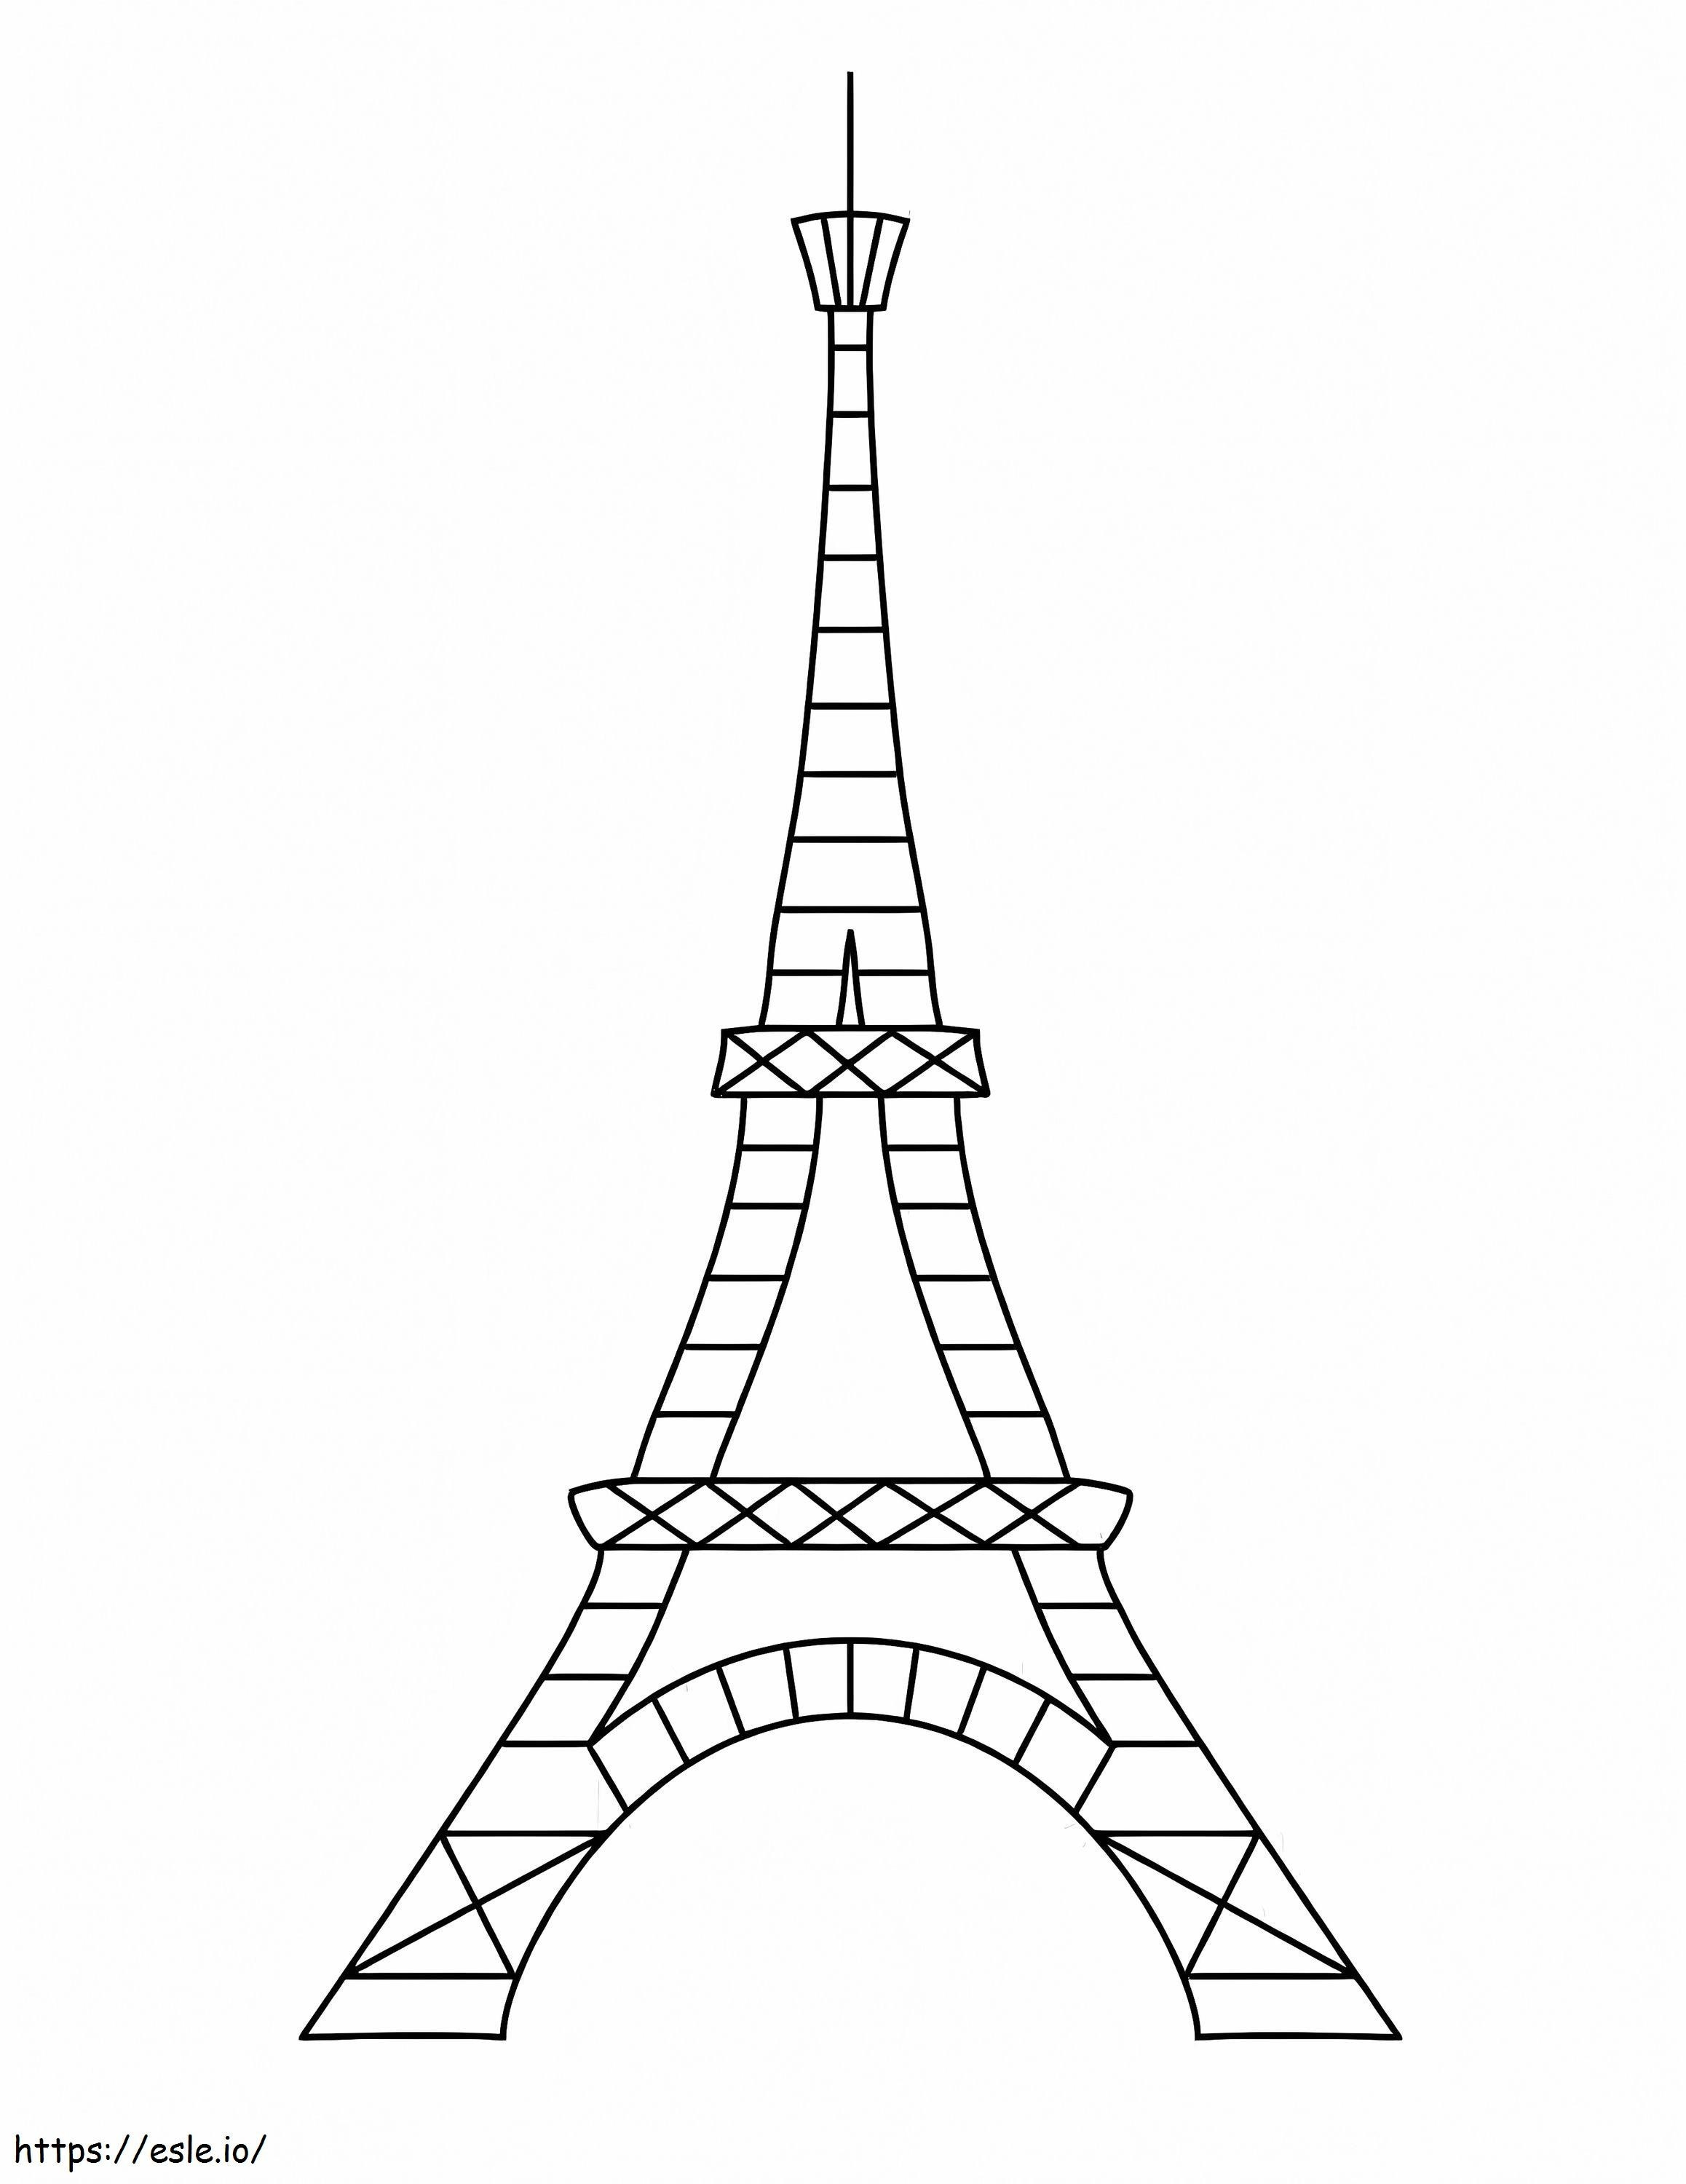 Eiffel Tower 11 coloring page